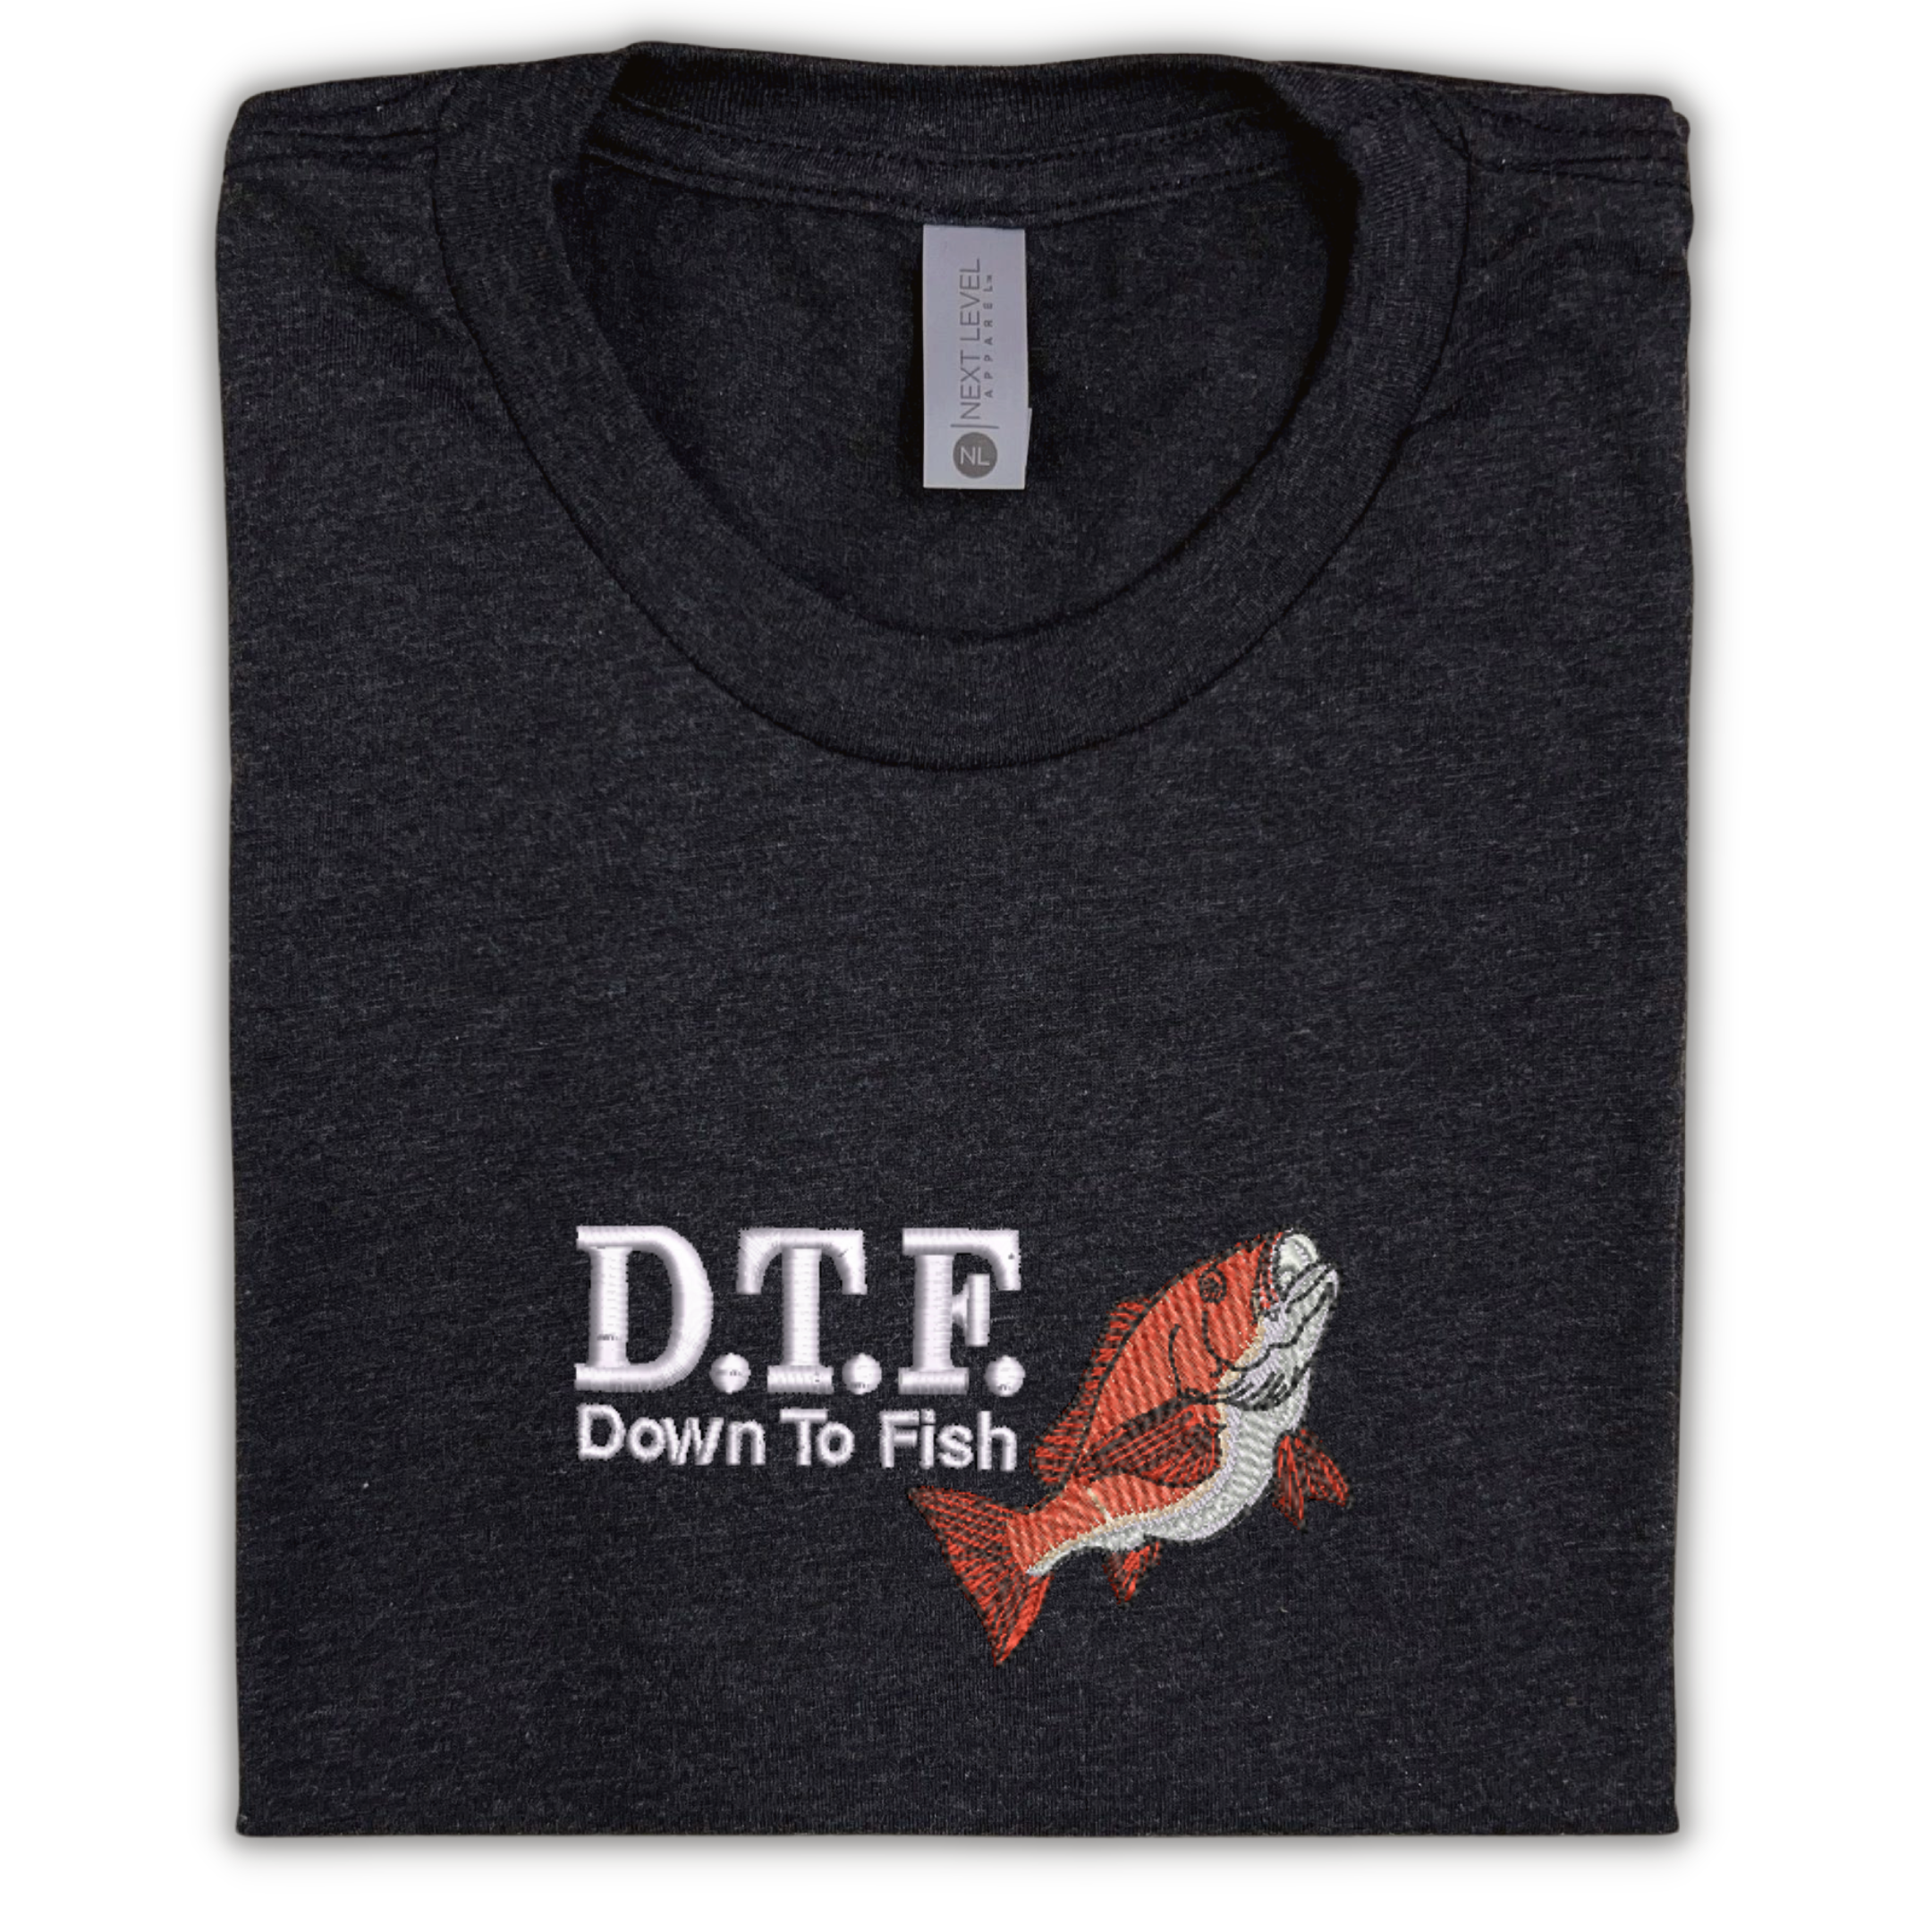 Down To Fish DTF Embroidered Tee Shirt Unisex